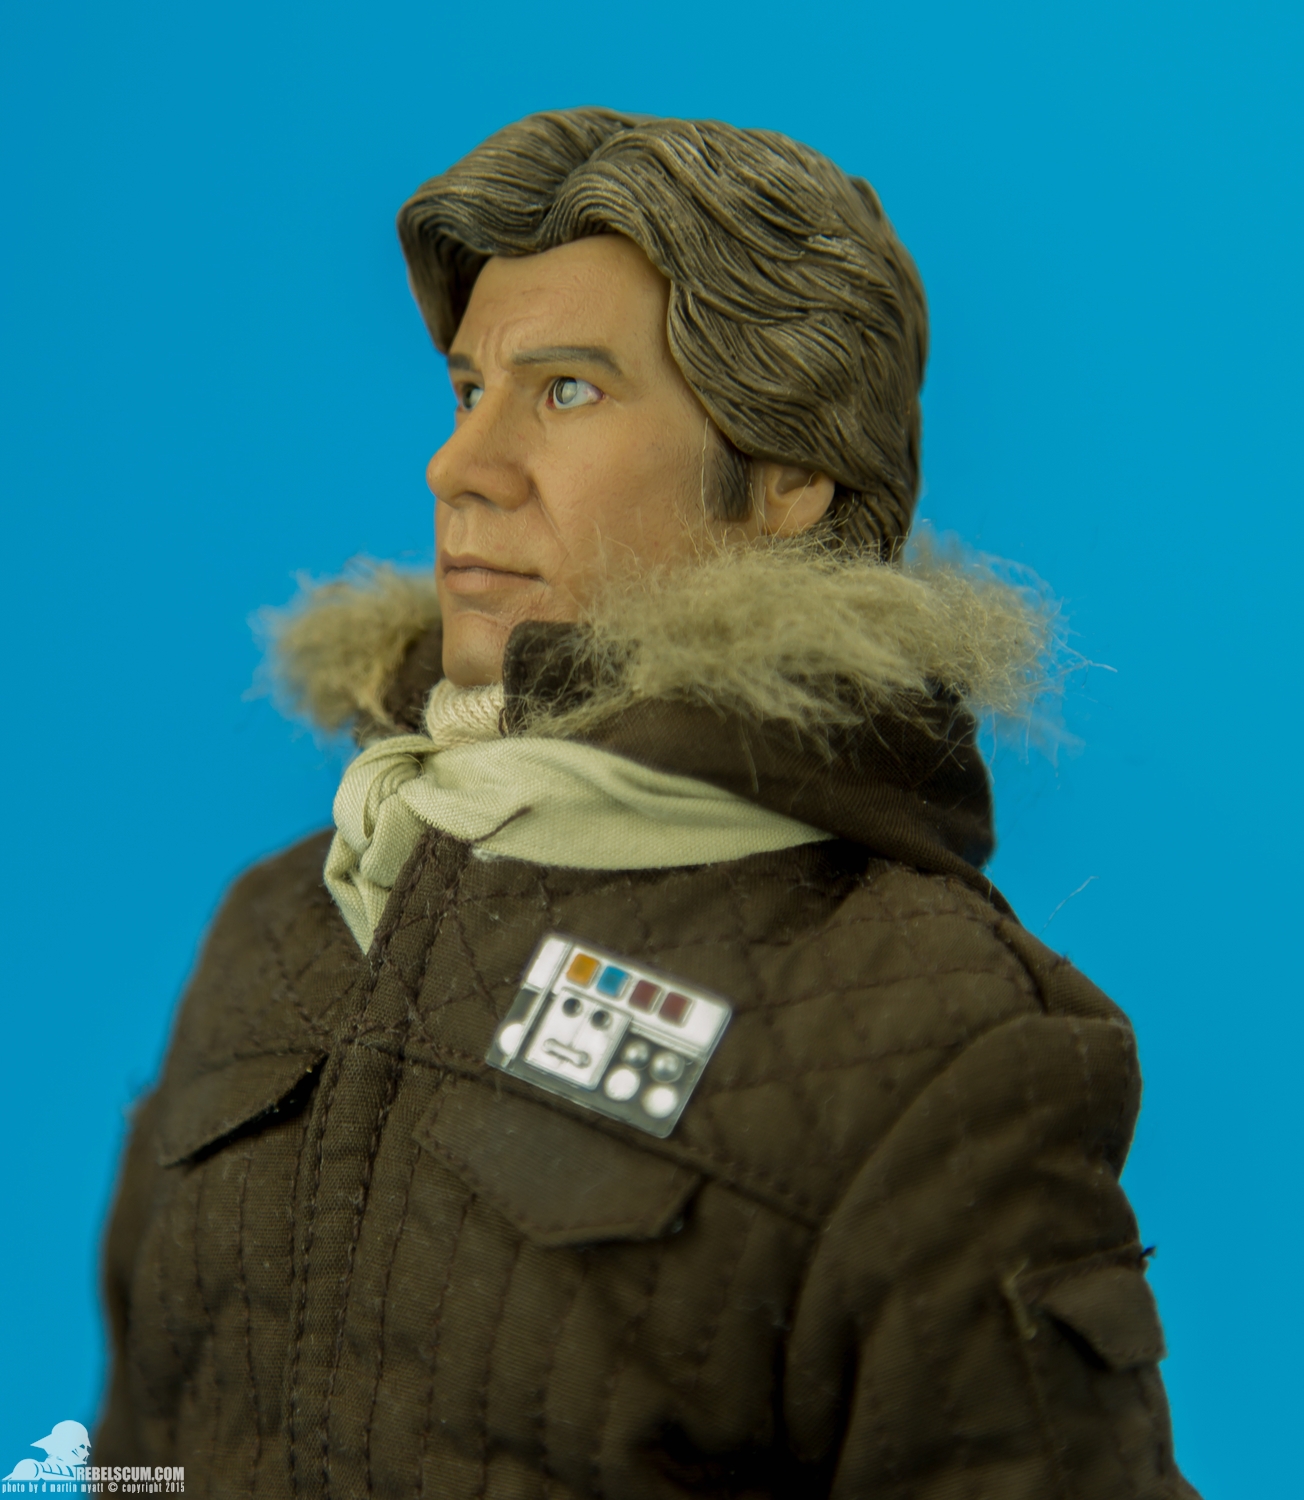 Han-Solo-Hoth-Brown-Sixth-Scale-Sideshow-Collectibles-Star-Wars-011.jpg